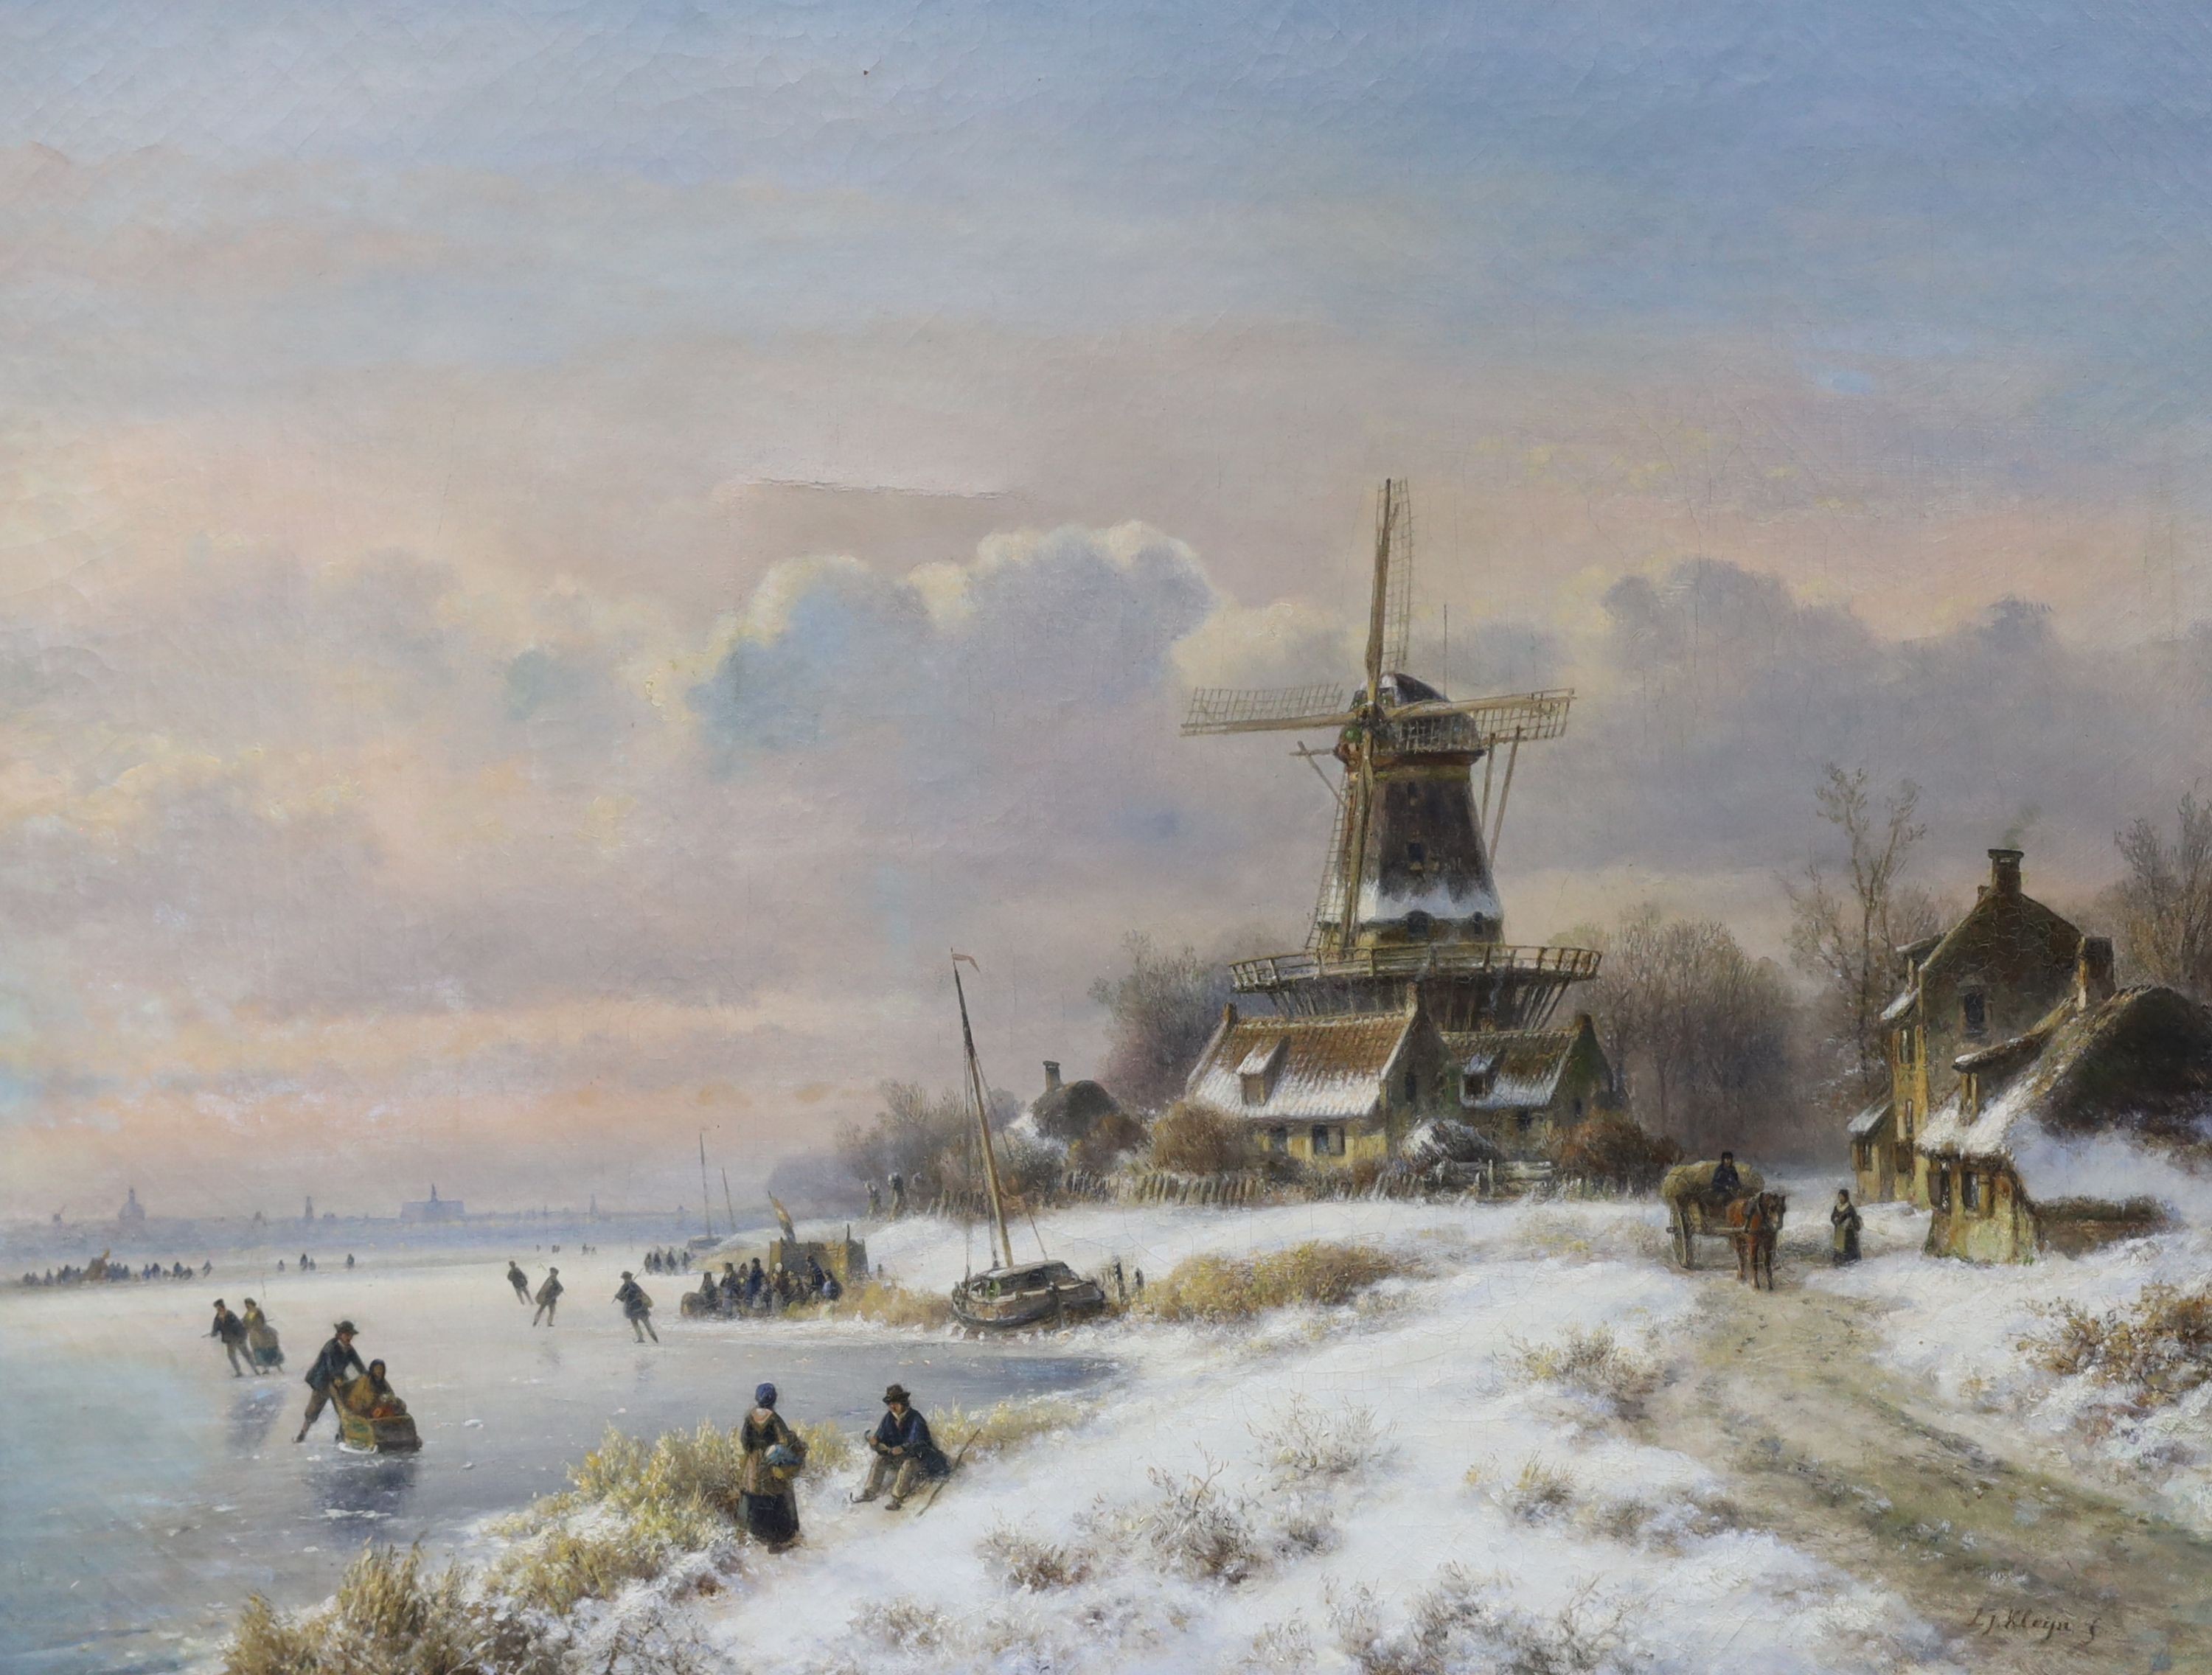 Lodewijk Johannes Kleijn (1817-1897), oil on canvas, Winter landscape with figures skating beside a windmill, signed, 59 x 76cm